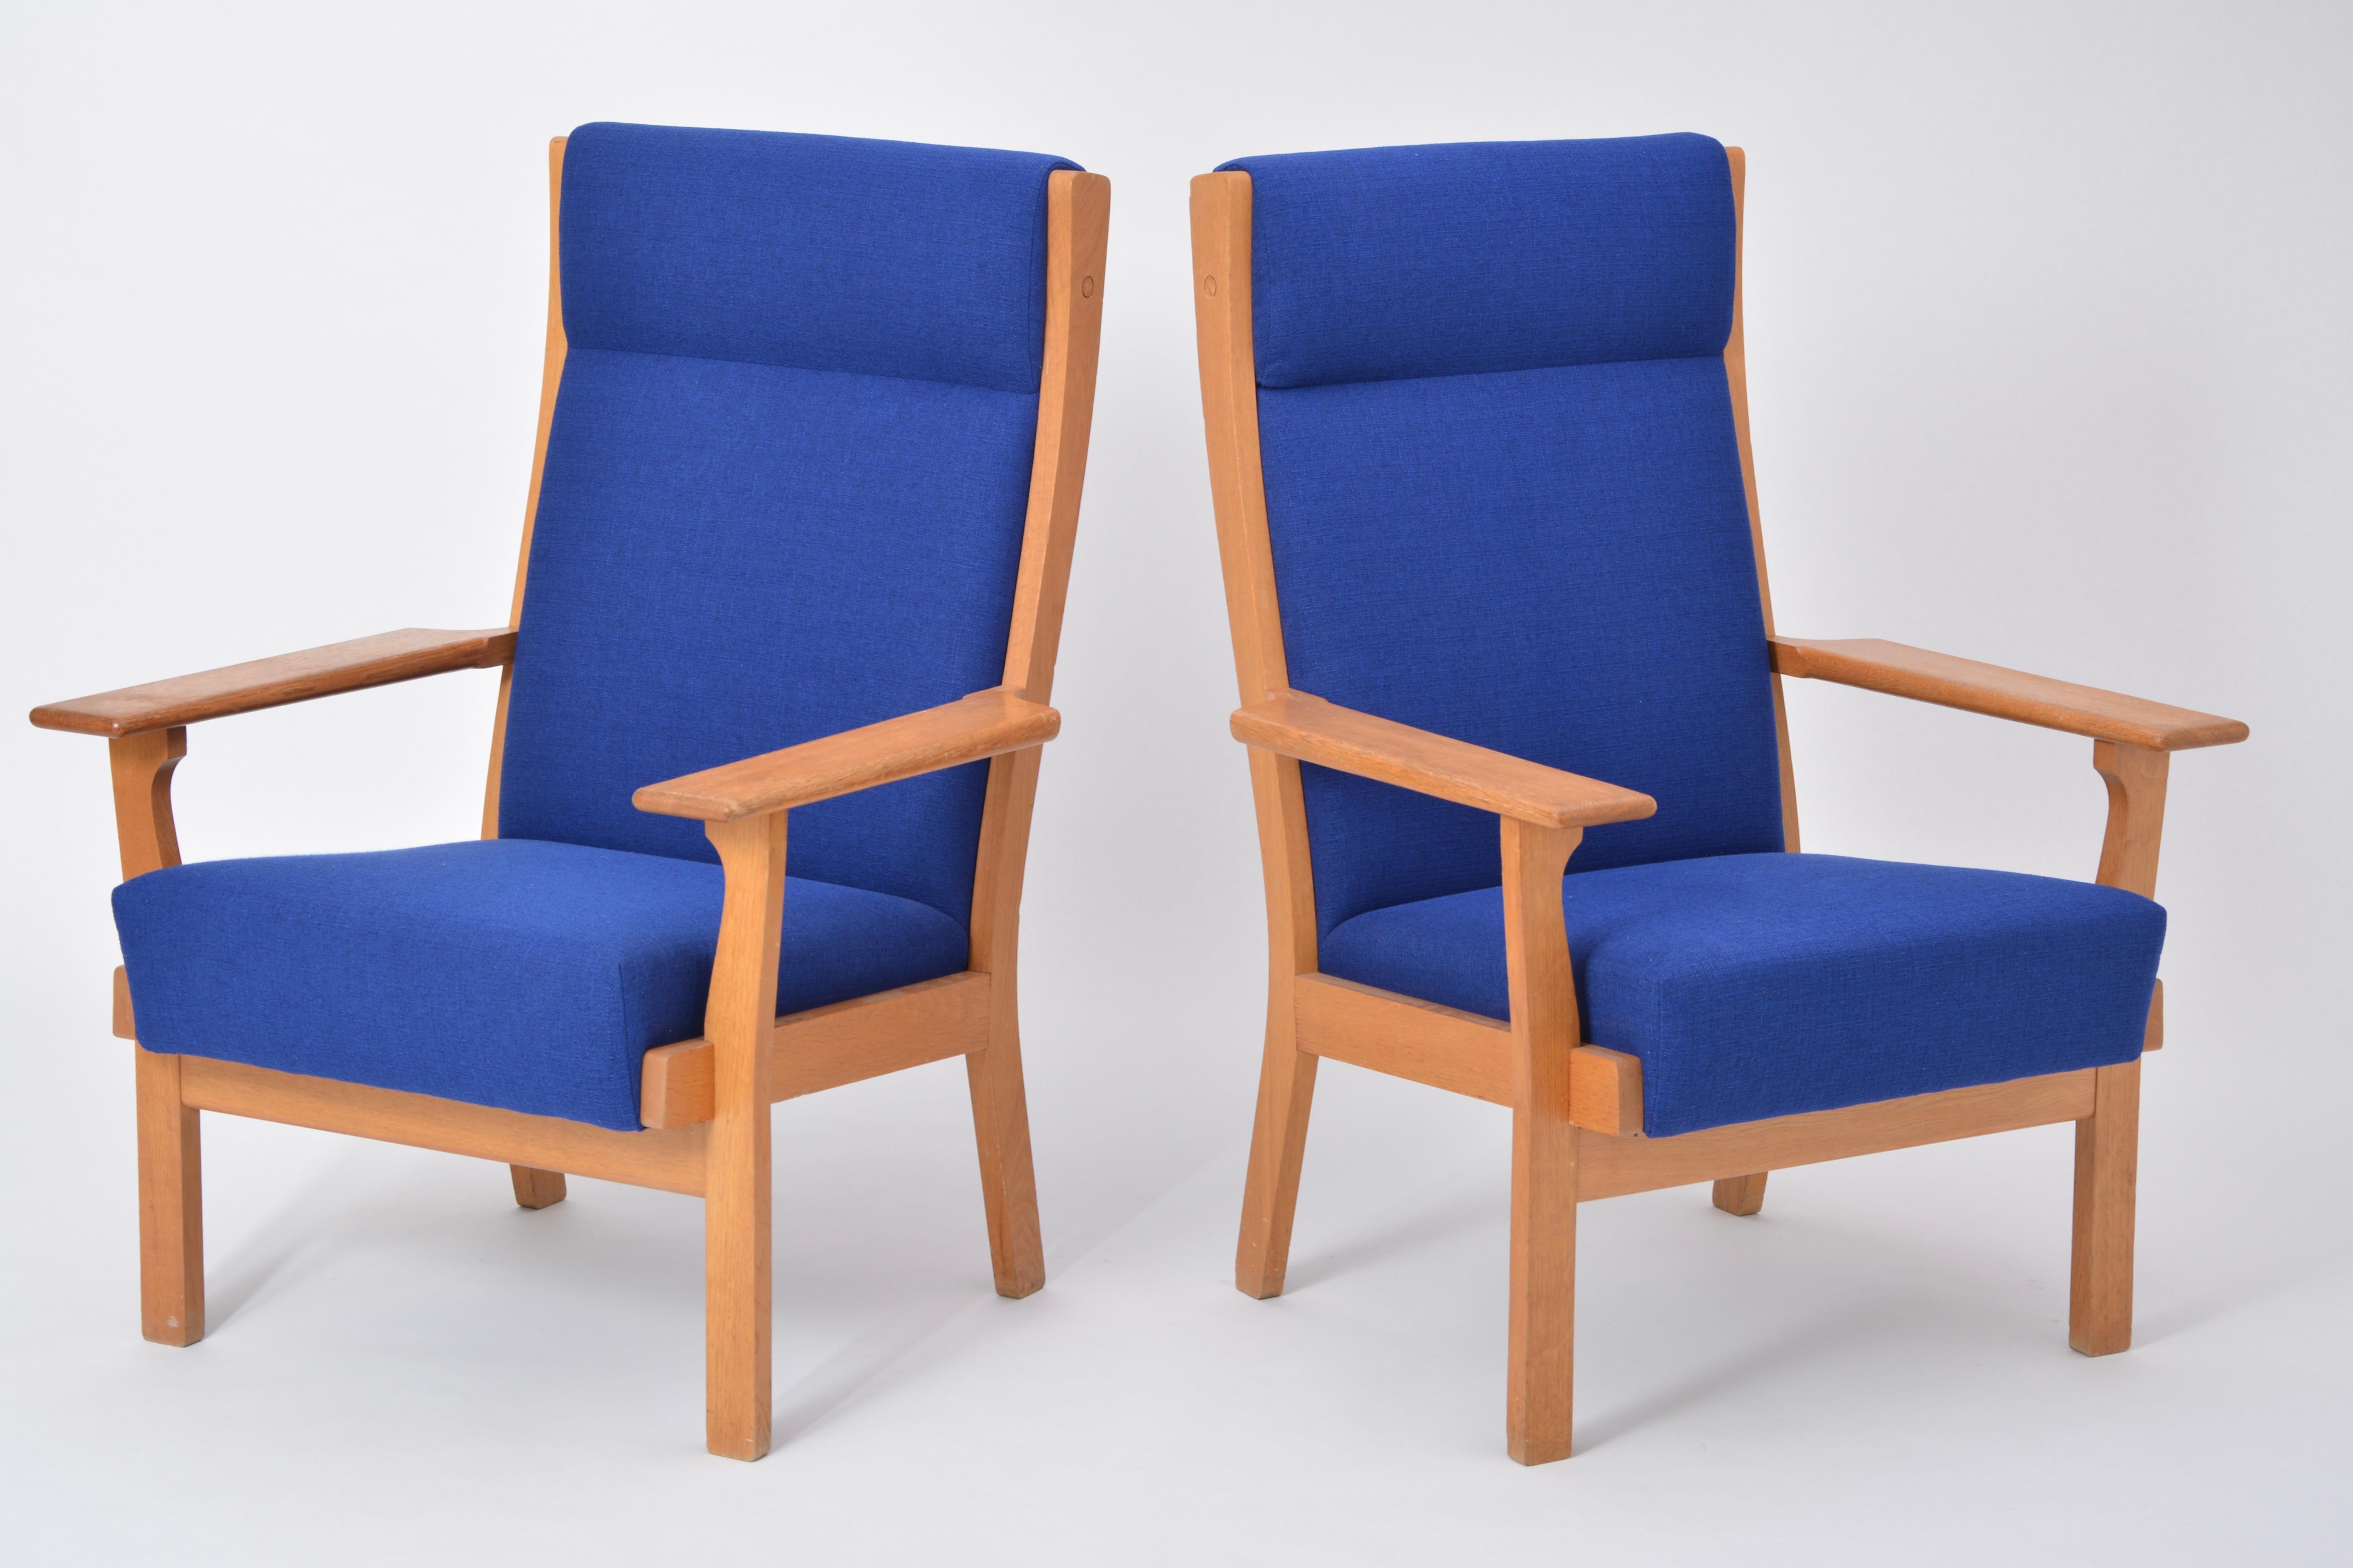 20th Century Set of Two Danish Mid-Century Modern GE 181 a Chairs by Hans Wegner for GETAMA For Sale